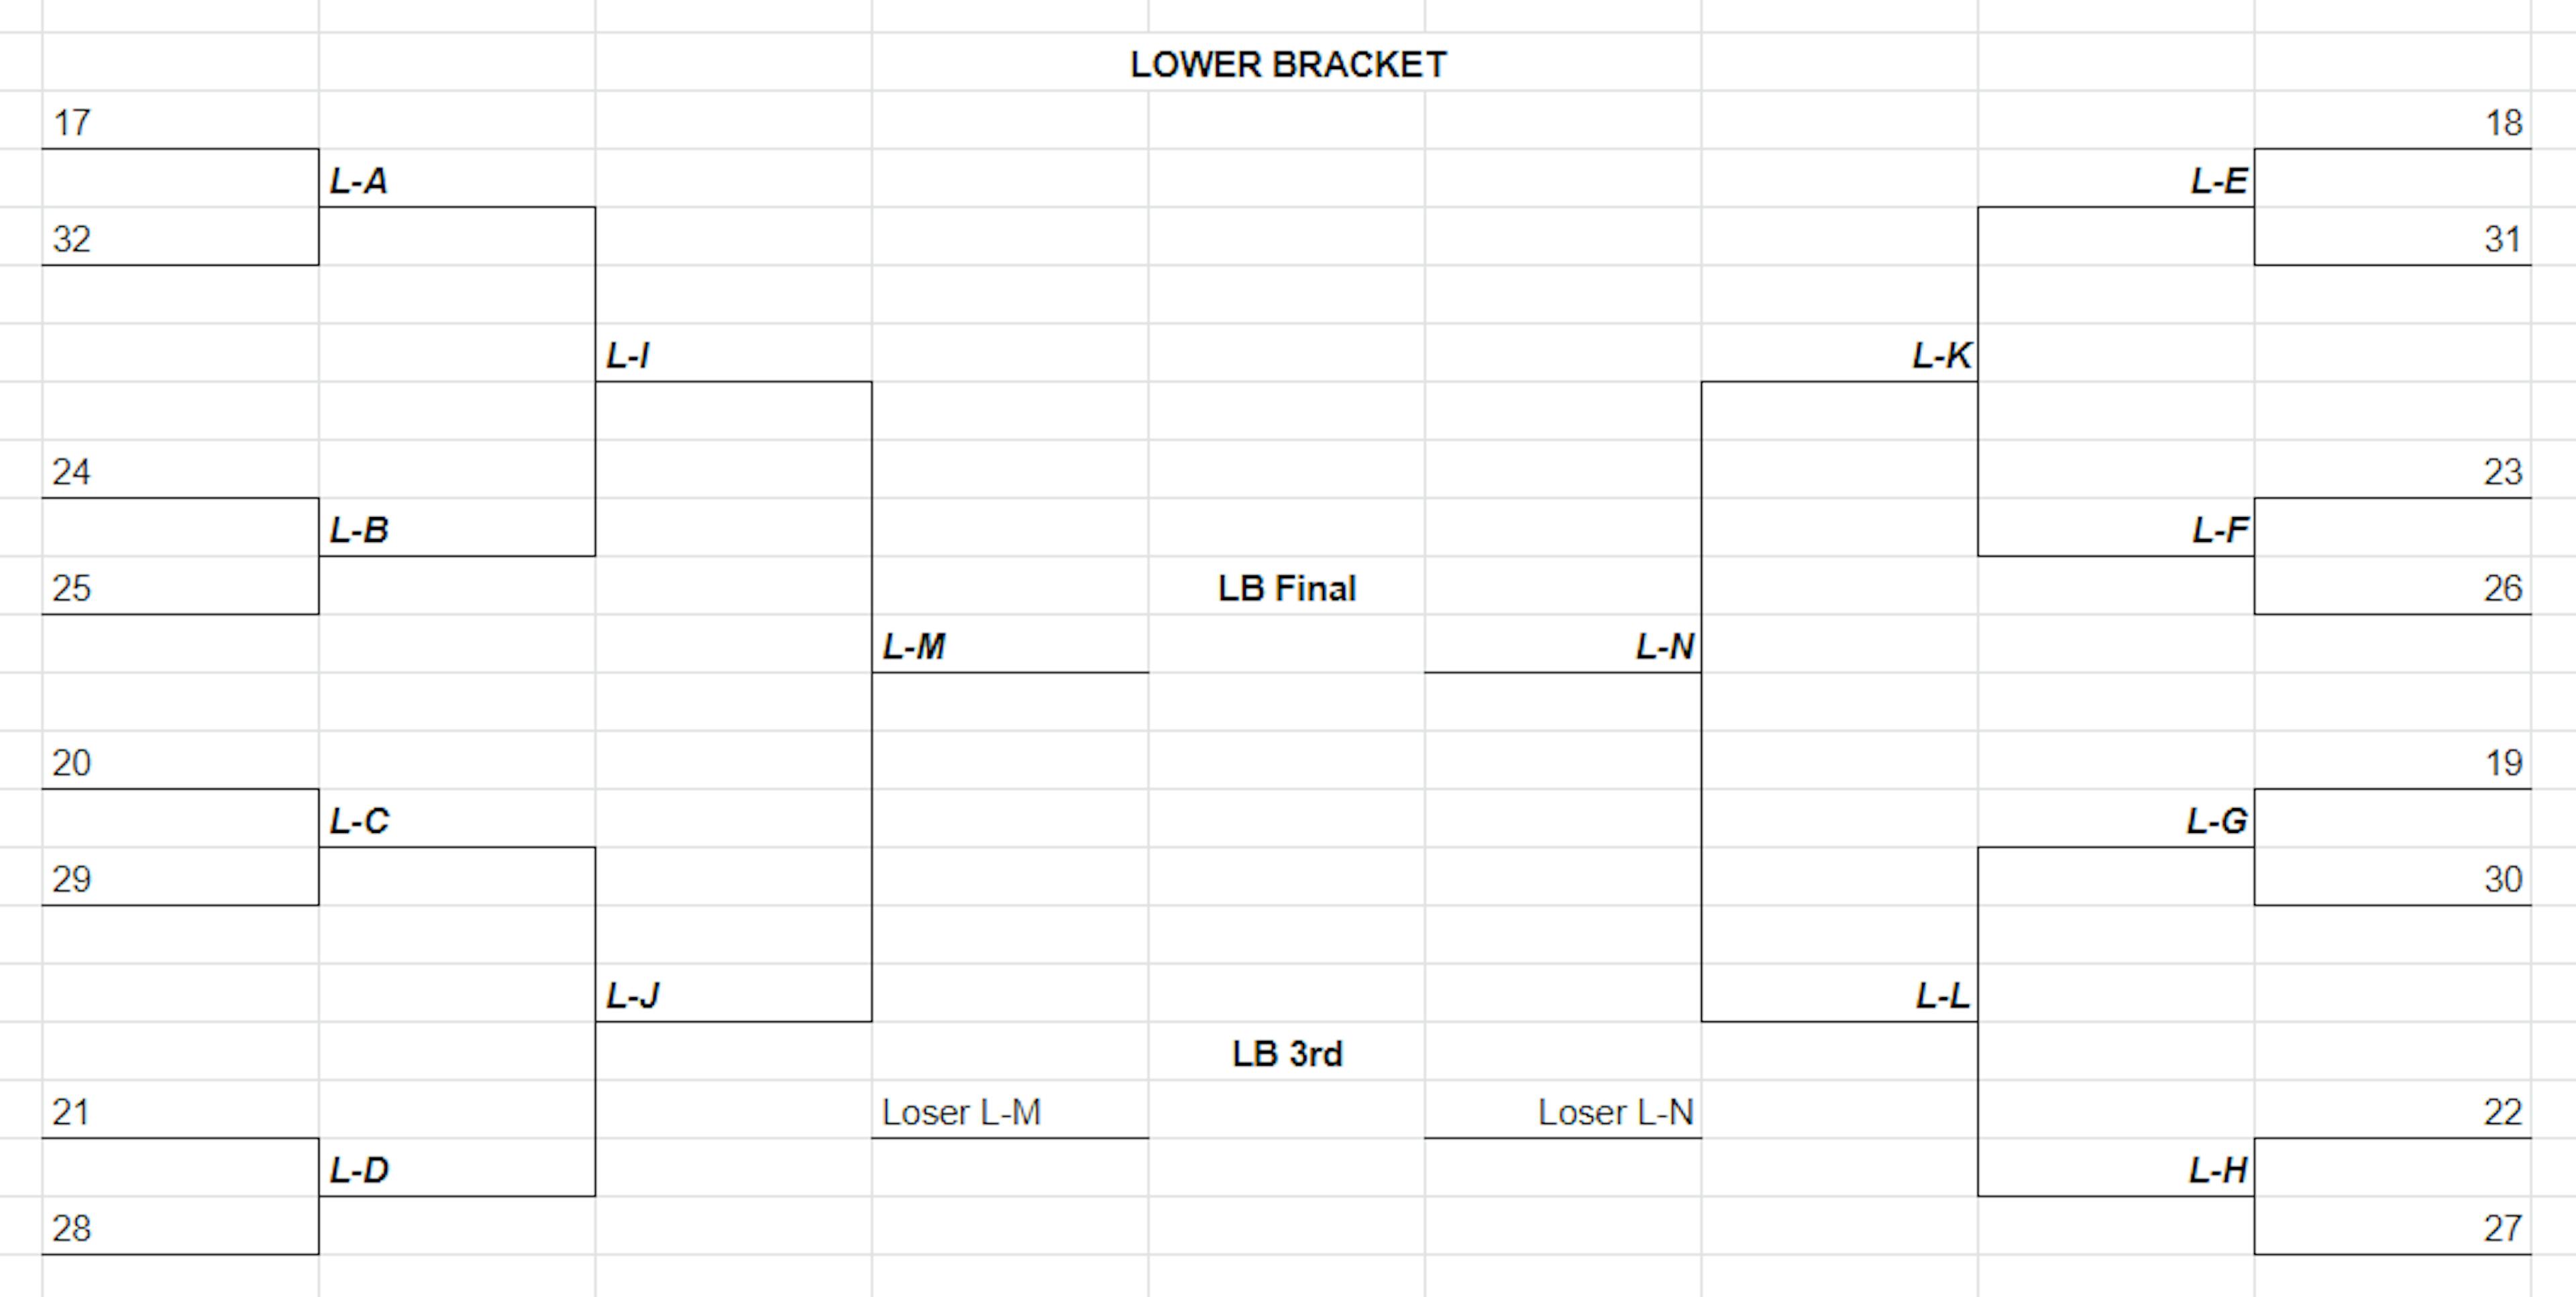 Graphic displaying the Lower bracket knockout stage